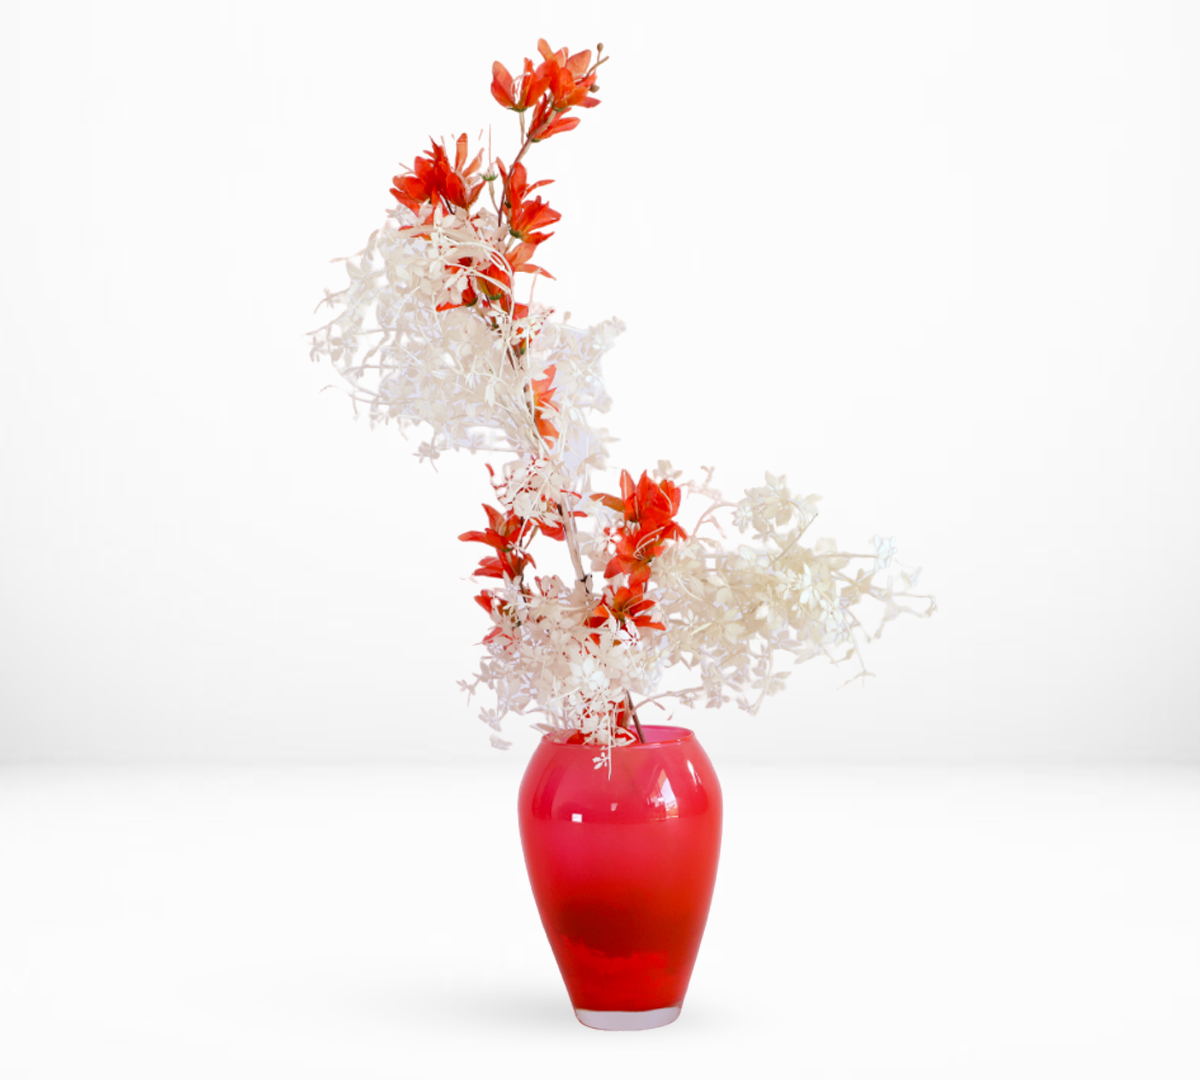 A Colored Glass Decorative Vase Filled With Artificial Flowers - Hand Arranged